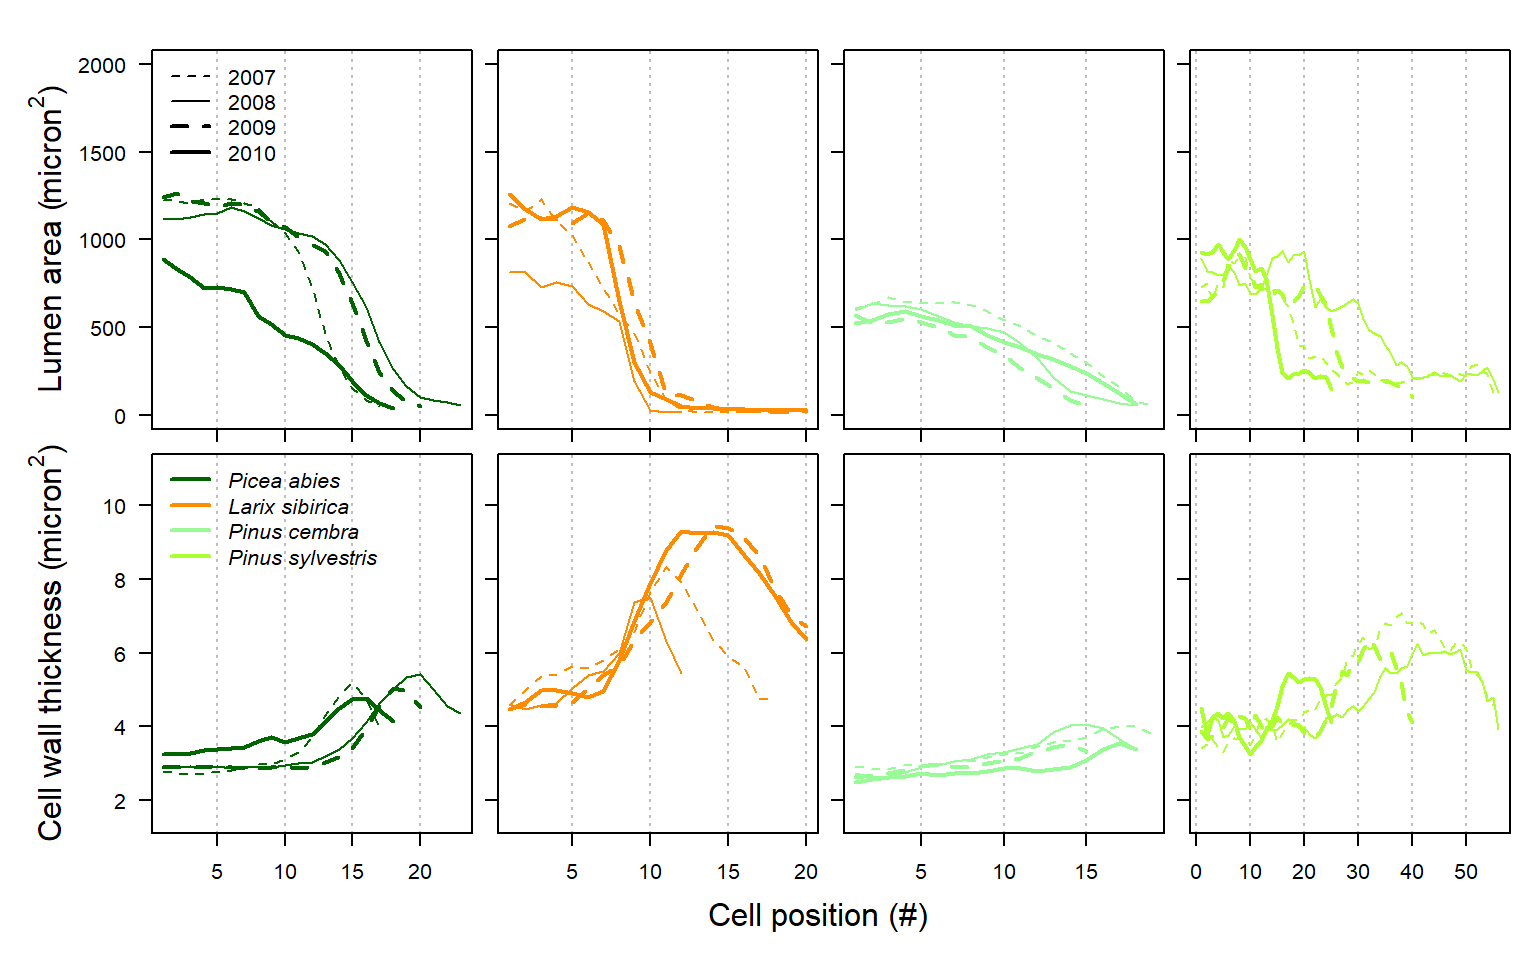 Comparison of individual tracheidograms within a single annual ring (upper graph) and mean tracheidogram among years and species (lower graph) as obtained with RAPTOR using the example data (including Picea abies, Larix siberica, Pinus cembra and Pinus sylvestris; see example.data ()).